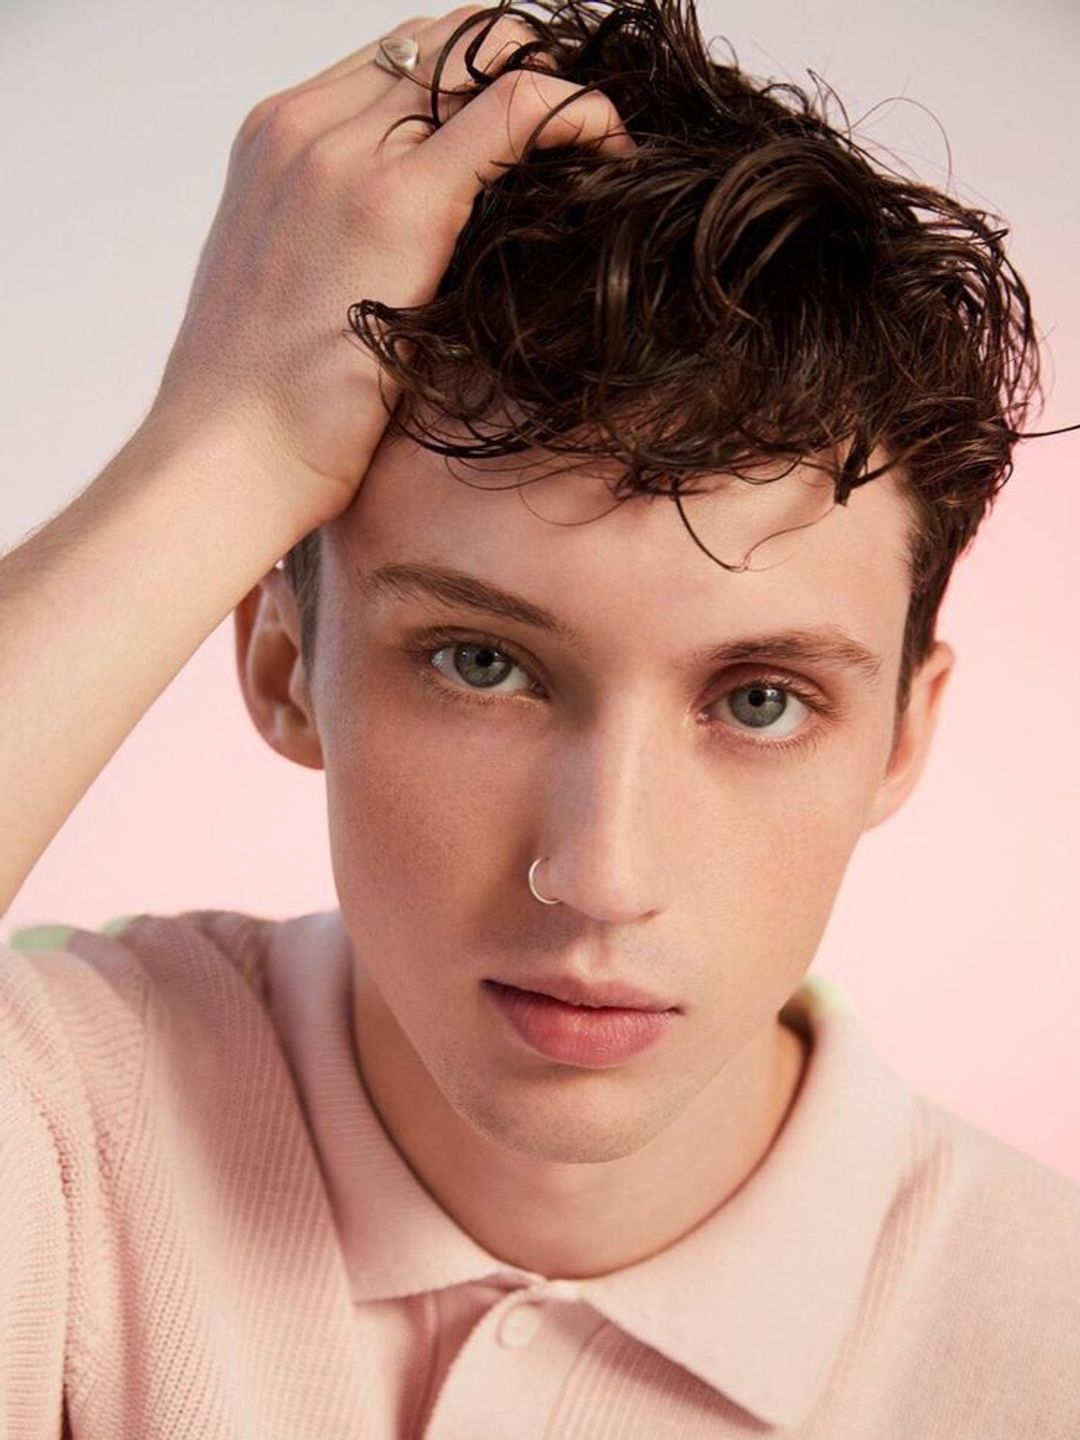 Troye Sivan place of birth